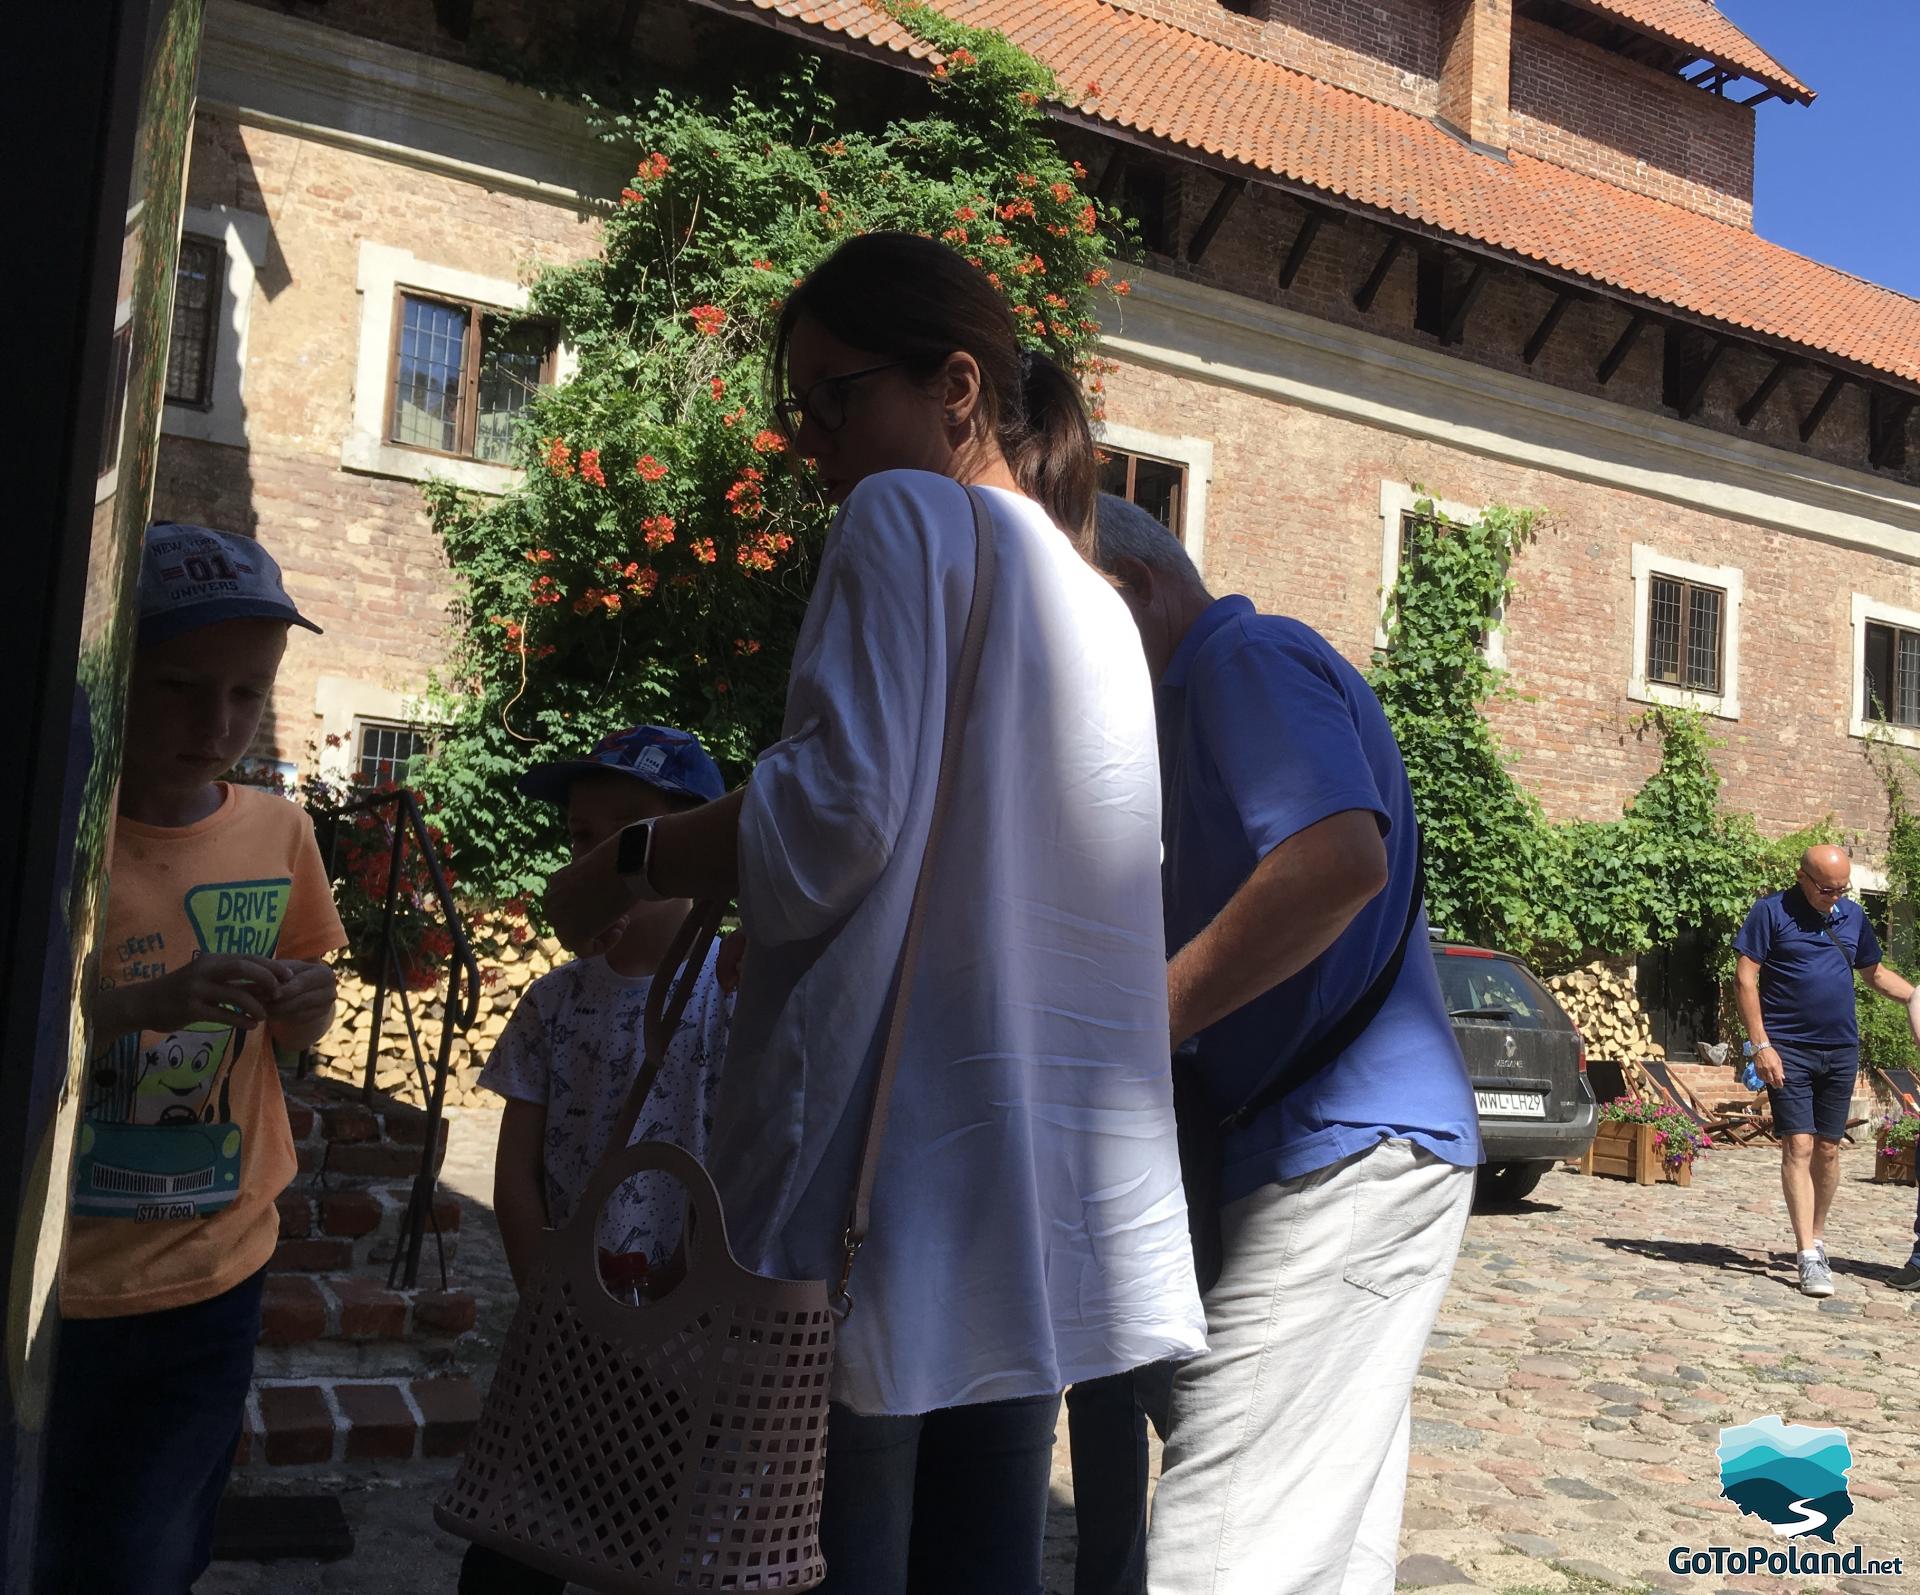 a family is in the courtyard of the castle